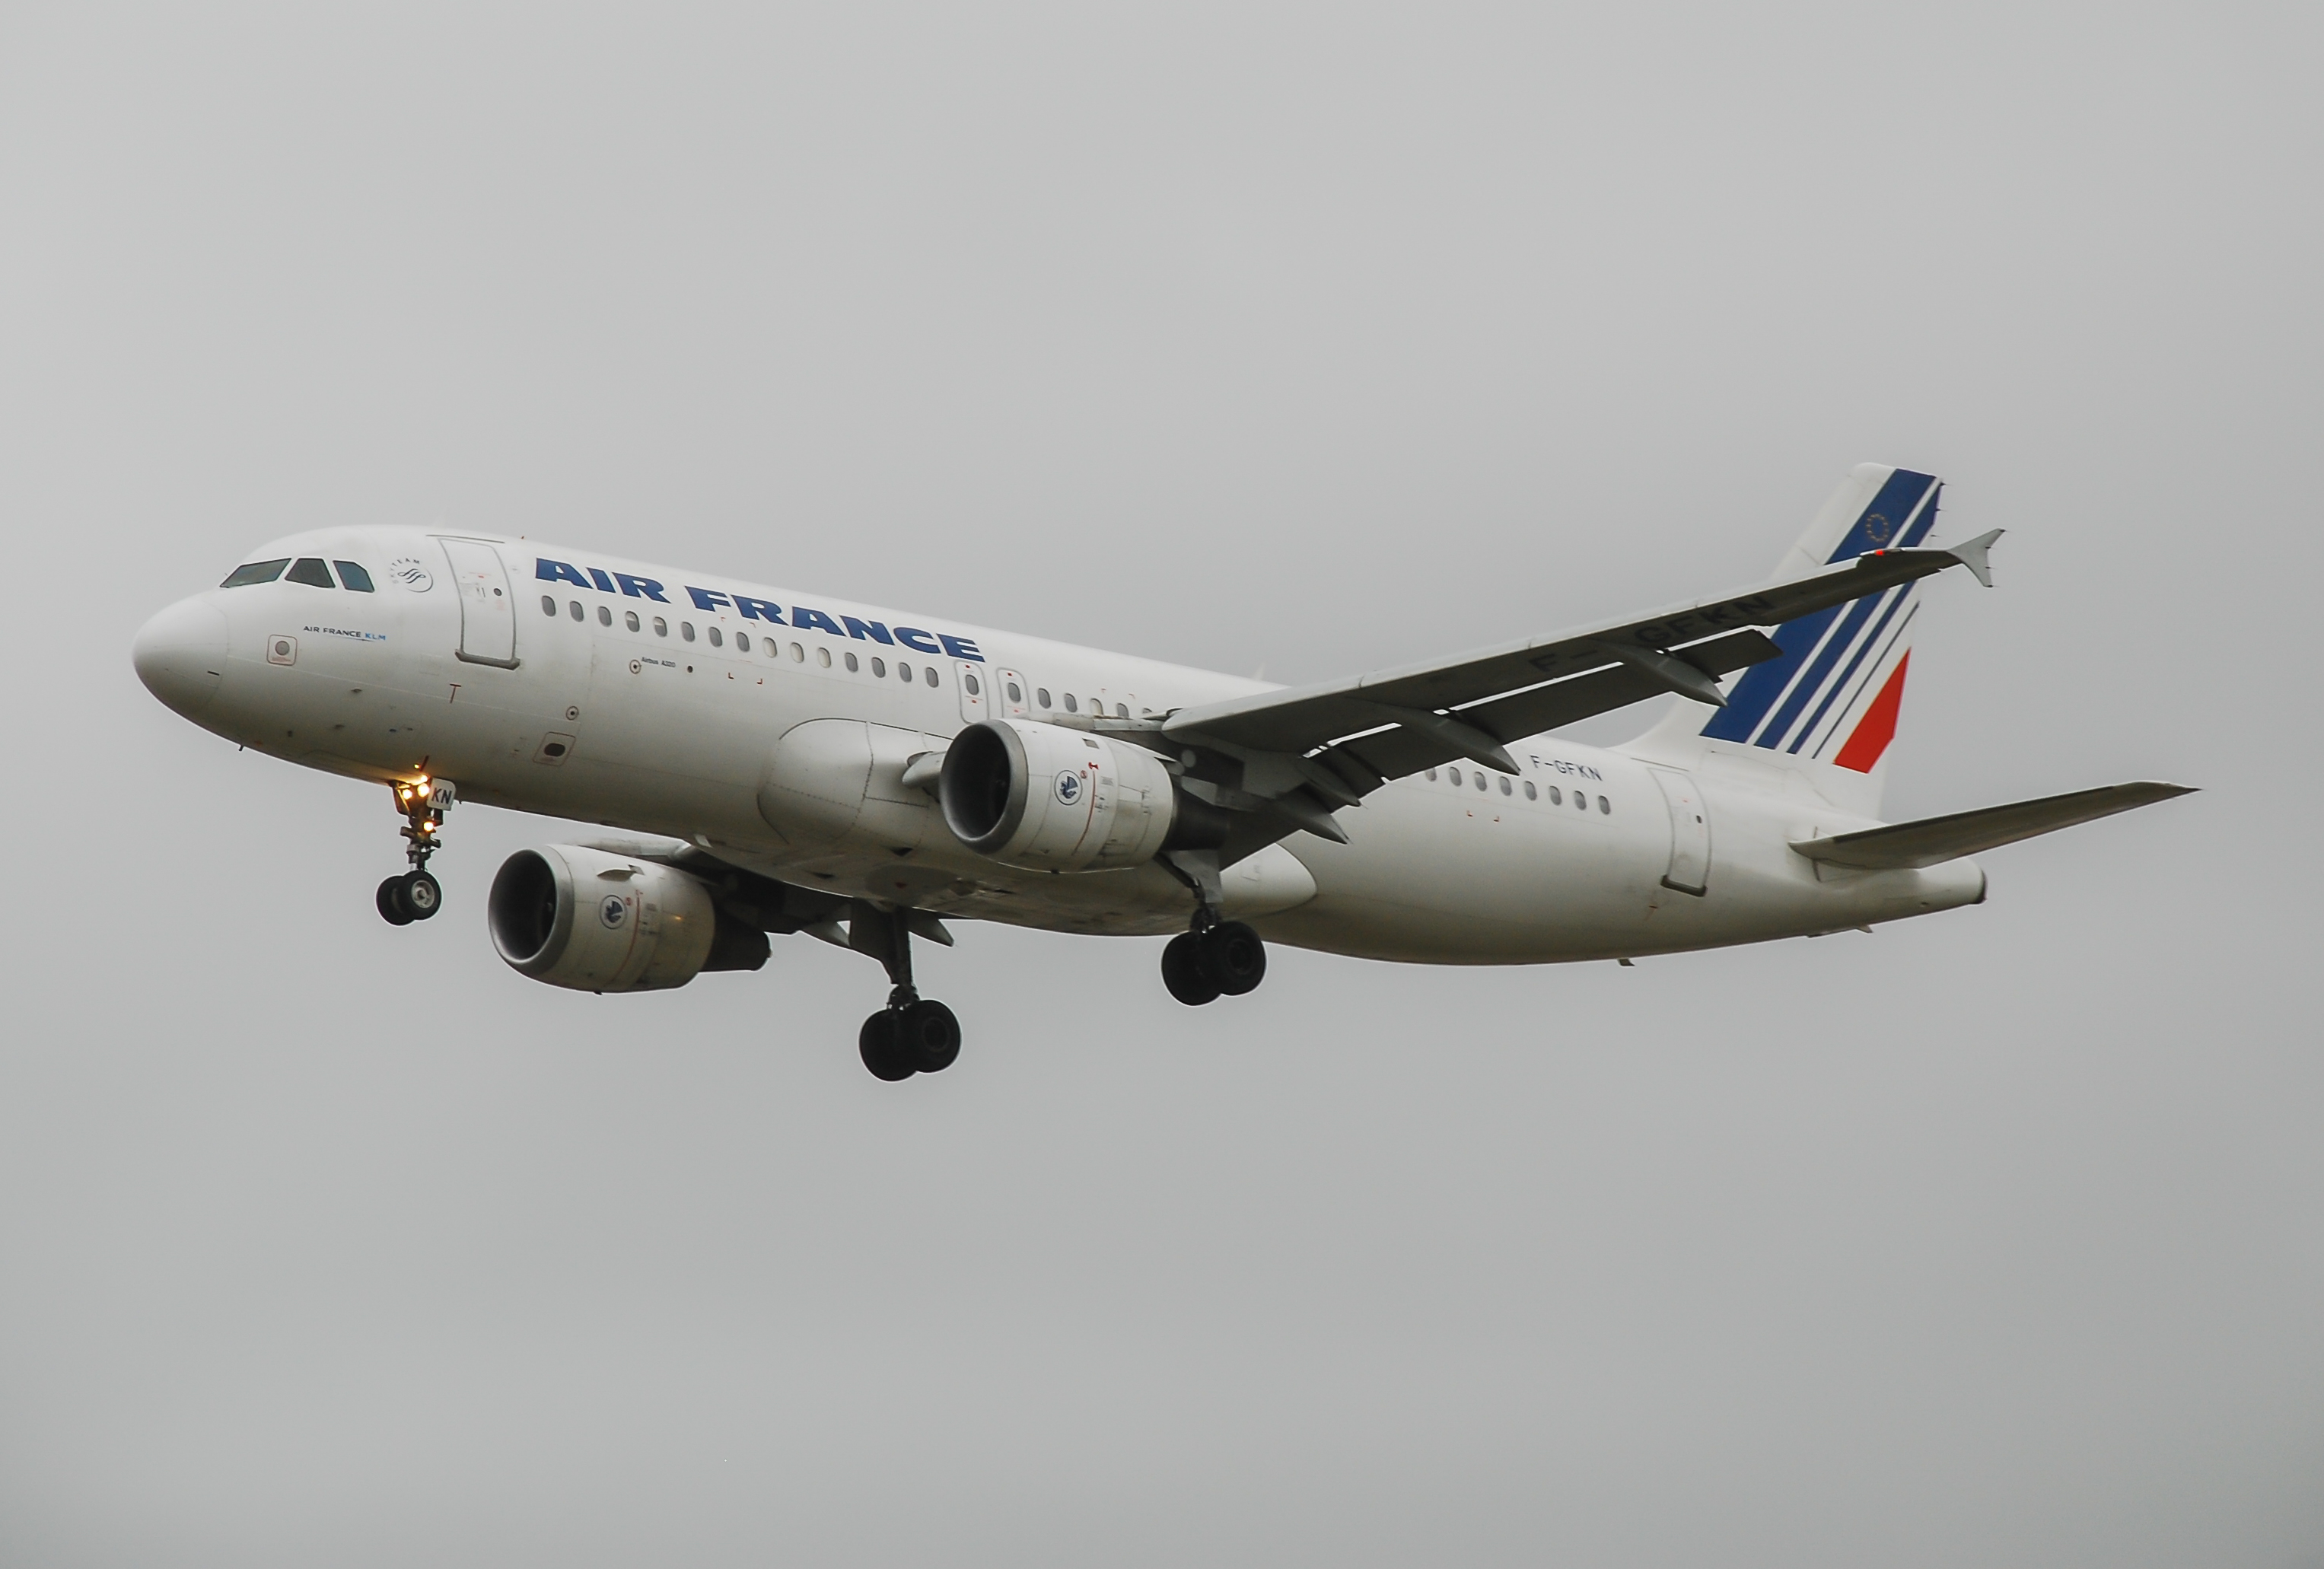 F-GFKN /FGFKN  Air France Airbus A320 Airframe Information - AVSpotters.com